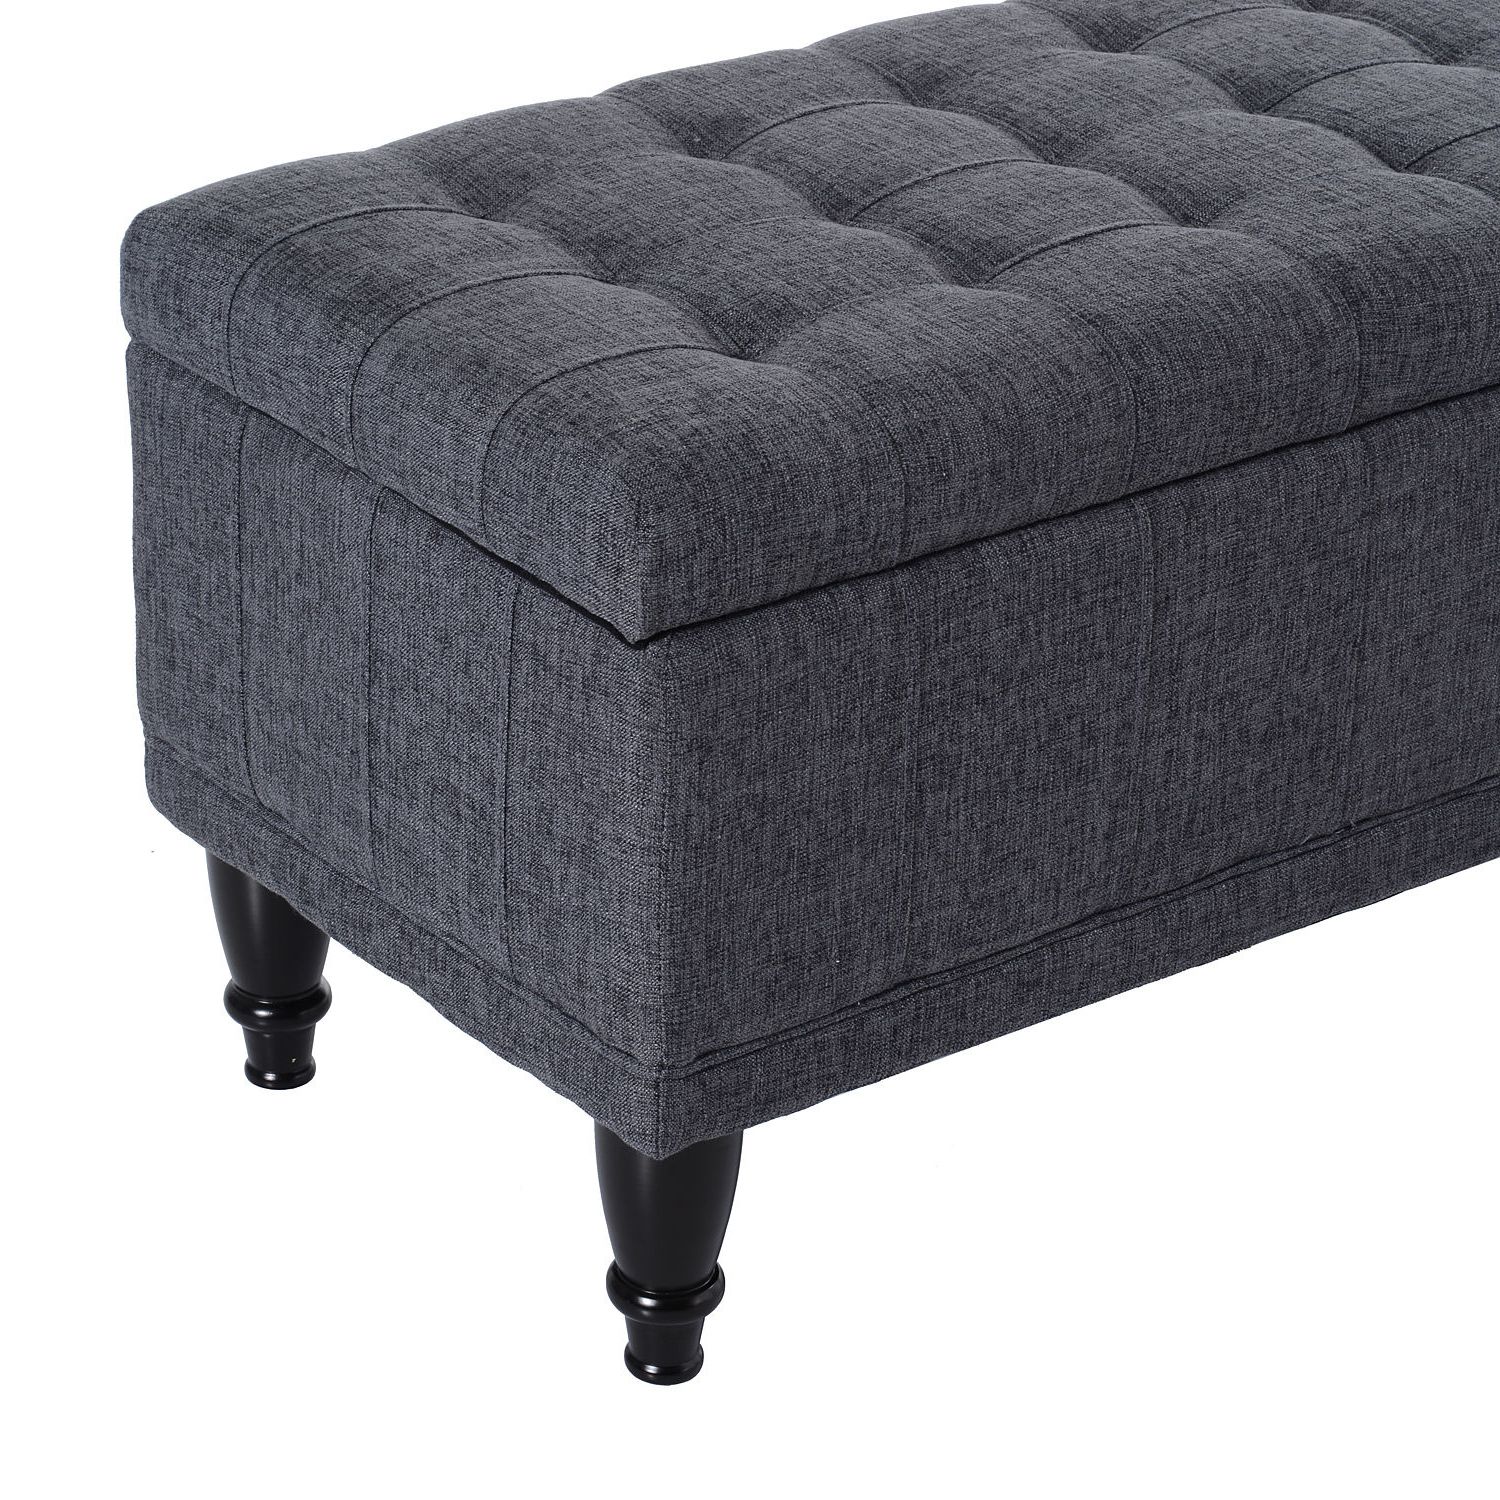 Charcoal Fabric Tufted Storage Ottomans For 2018 42" Lift Top Storage Ottoman Tufted Fabric Shoe Bench Footrest Stool (View 9 of 10)